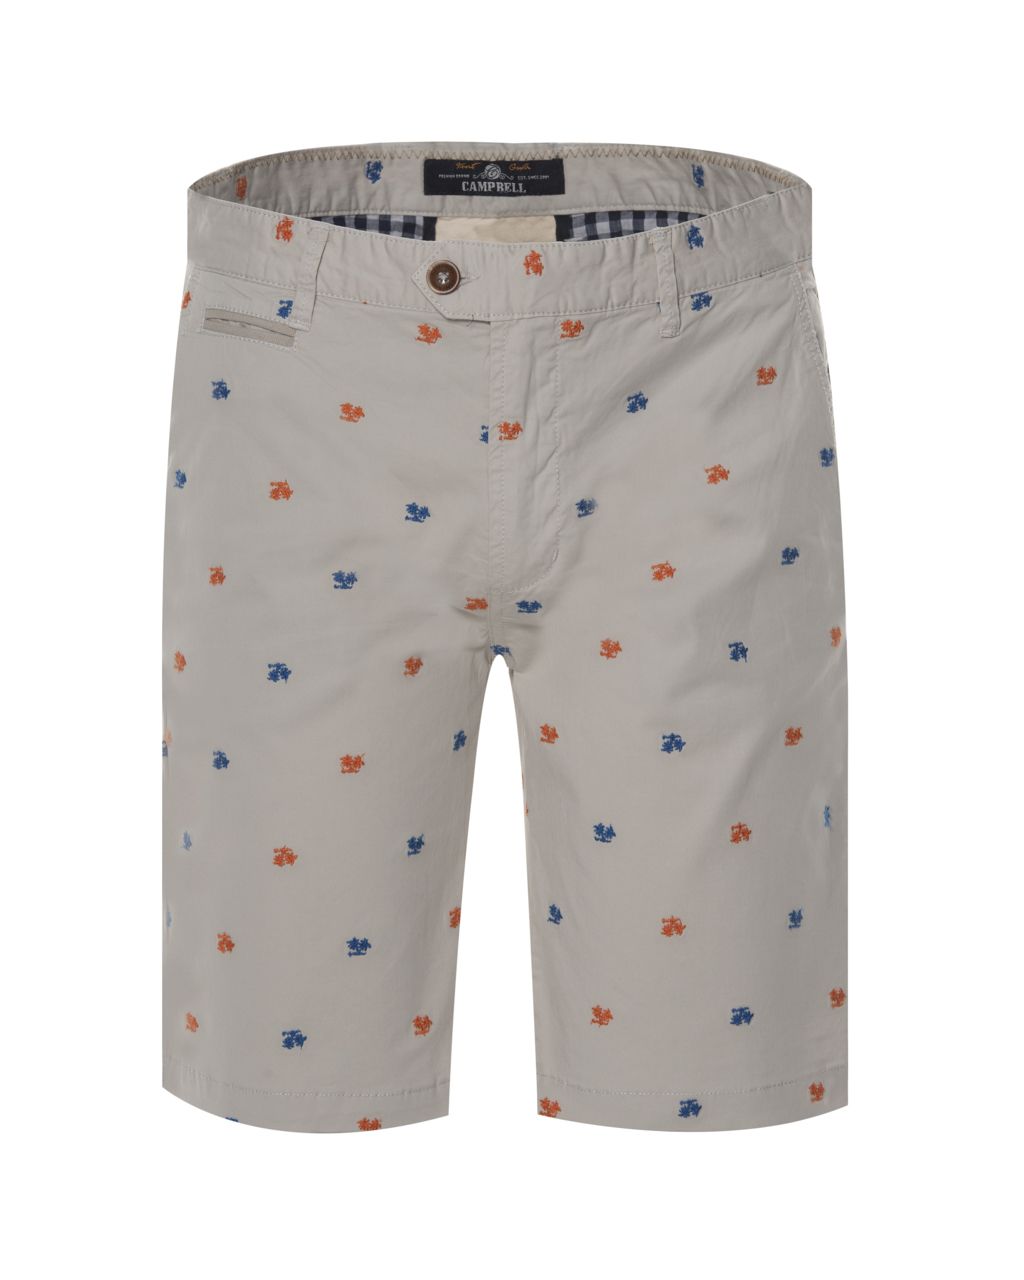 Campbell Classic Short Off white dessin 053810-001-31